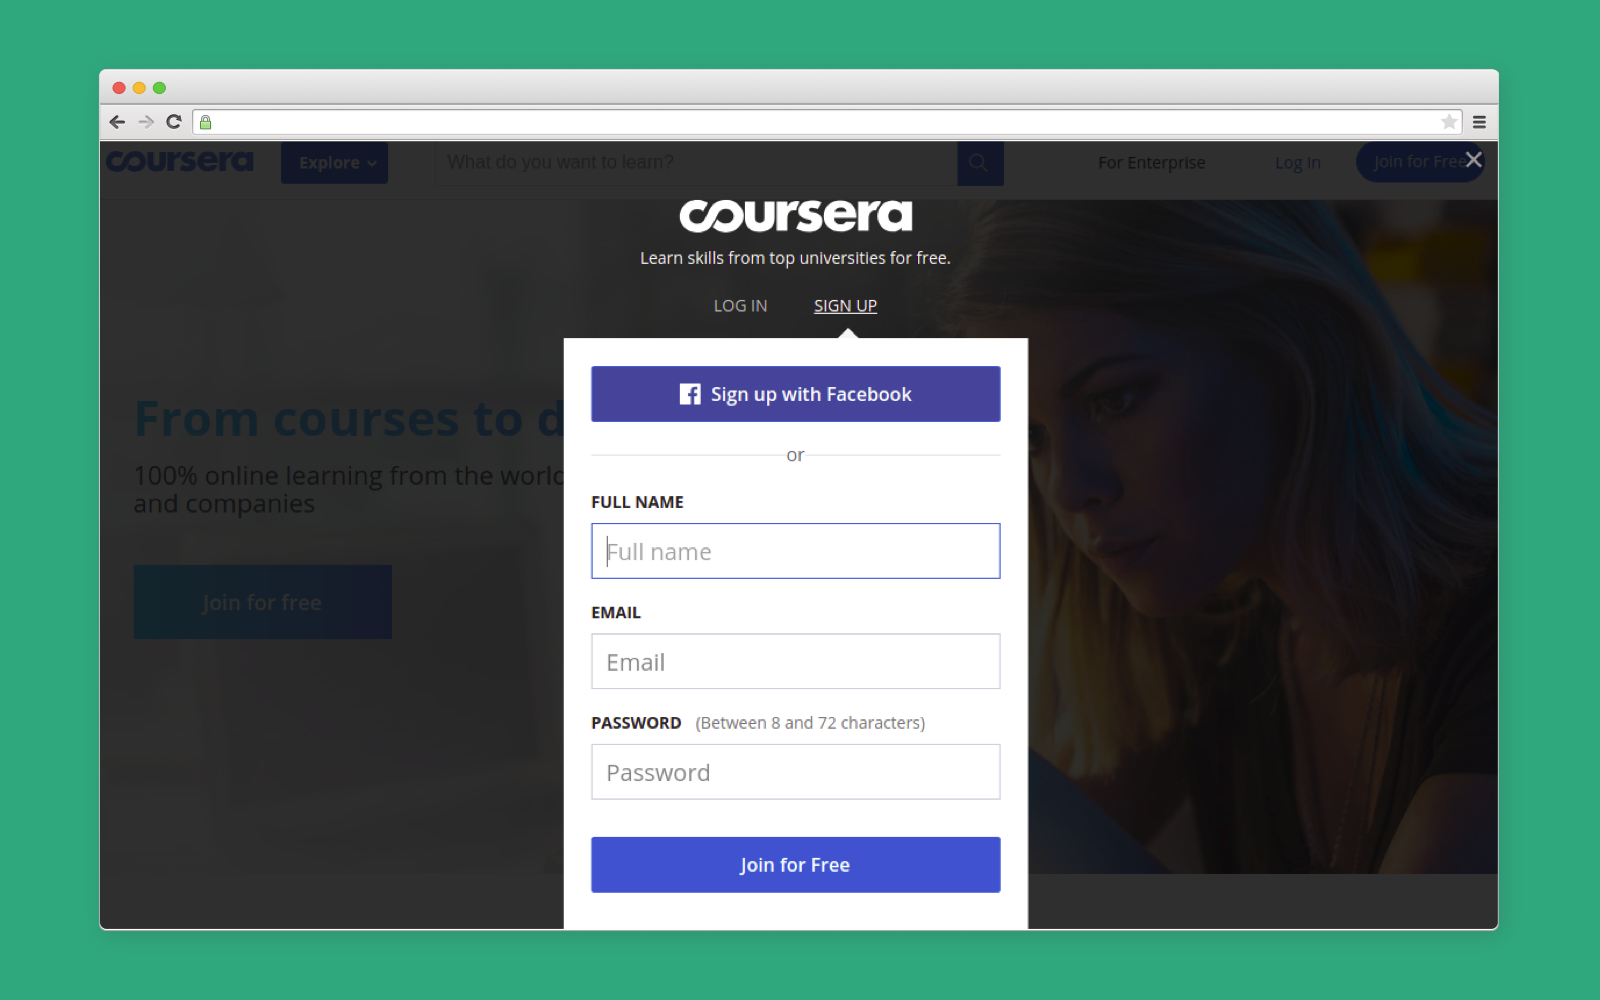 Want to Make An eLearning Platform Like Coursera or Udemy? Here's How to Start